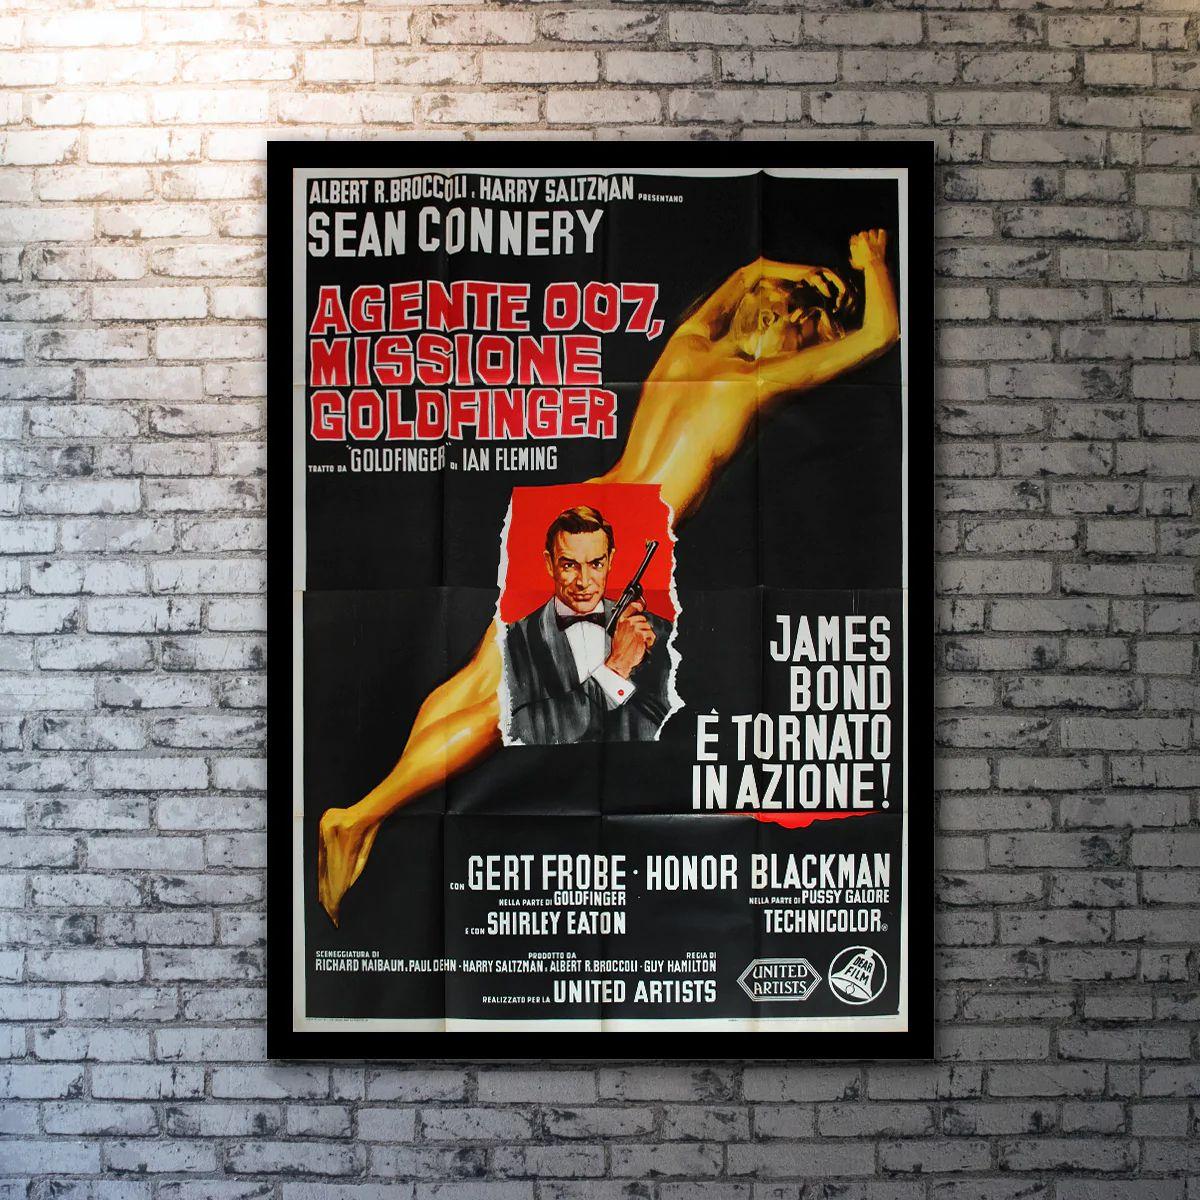 Goldfinger, Unframed Poster, 1964

Original 4 Foglio (55 X 79 Inches). Goldfinger, the third film in the Eon Productions series of movies based on Ian Fleming's James Bond, holds a place in film history as one of the best spy movies of all time.